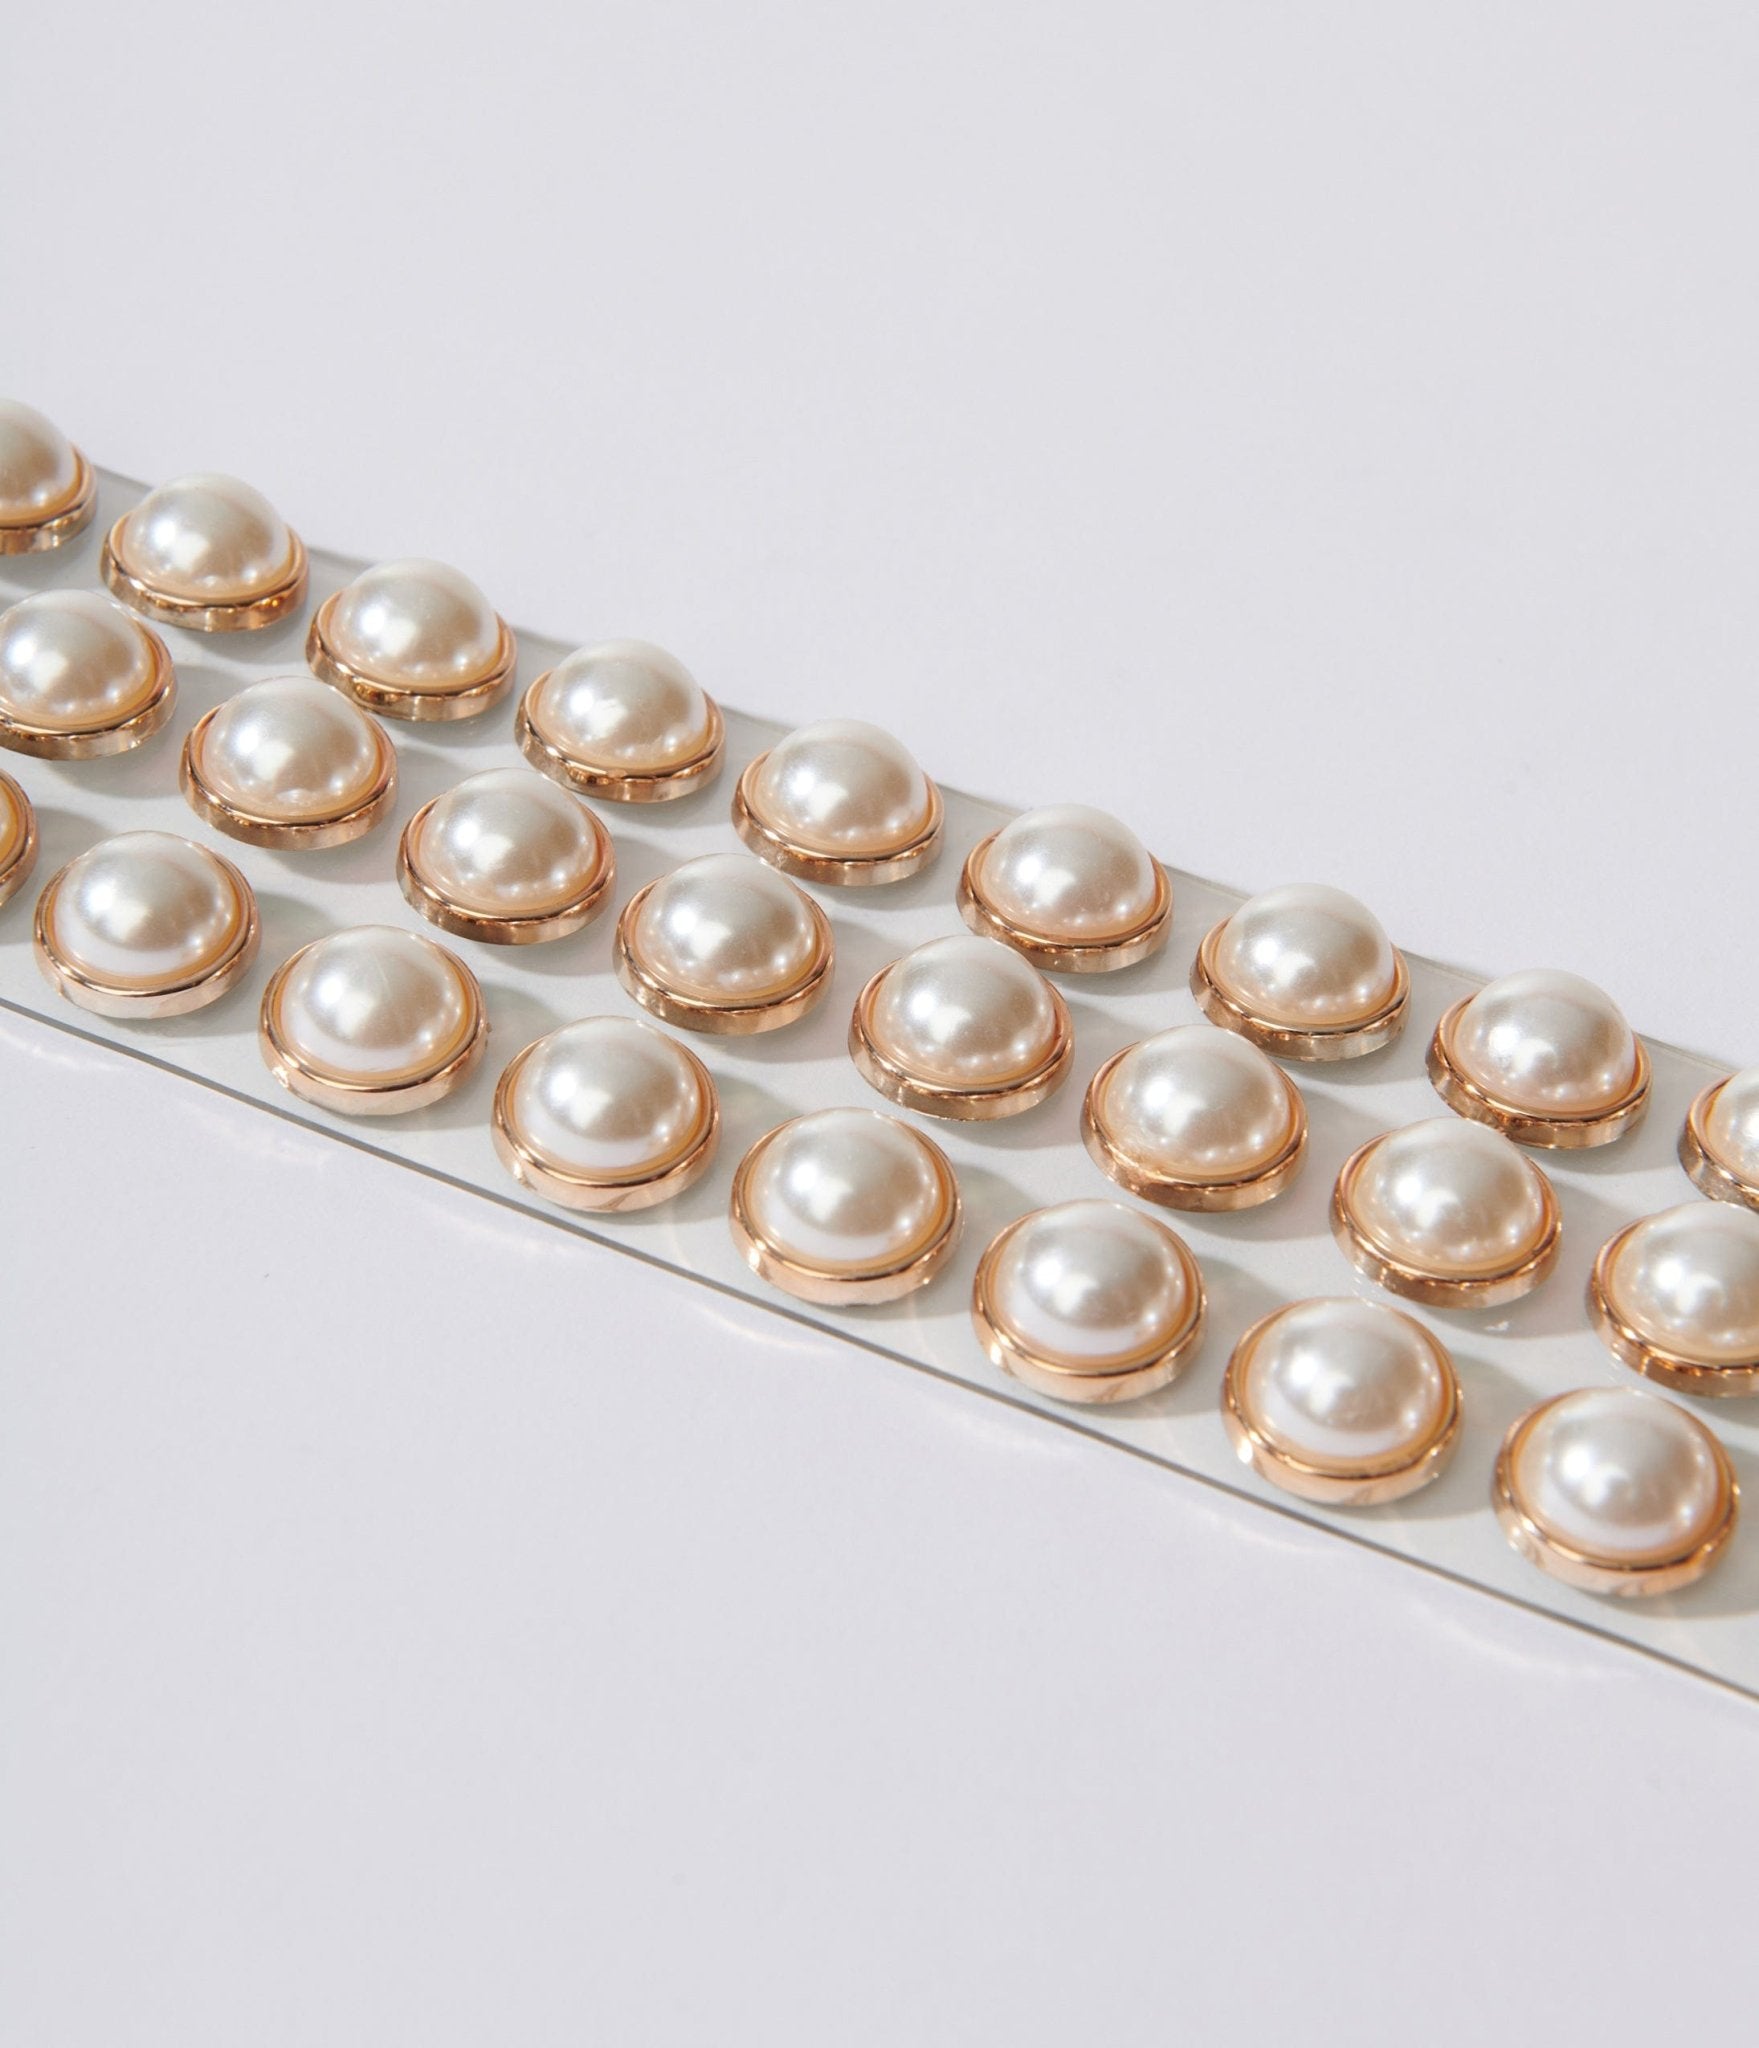 Sexy Pearl Belt, Layered Pearl Belt, Pearls, Belts for Women